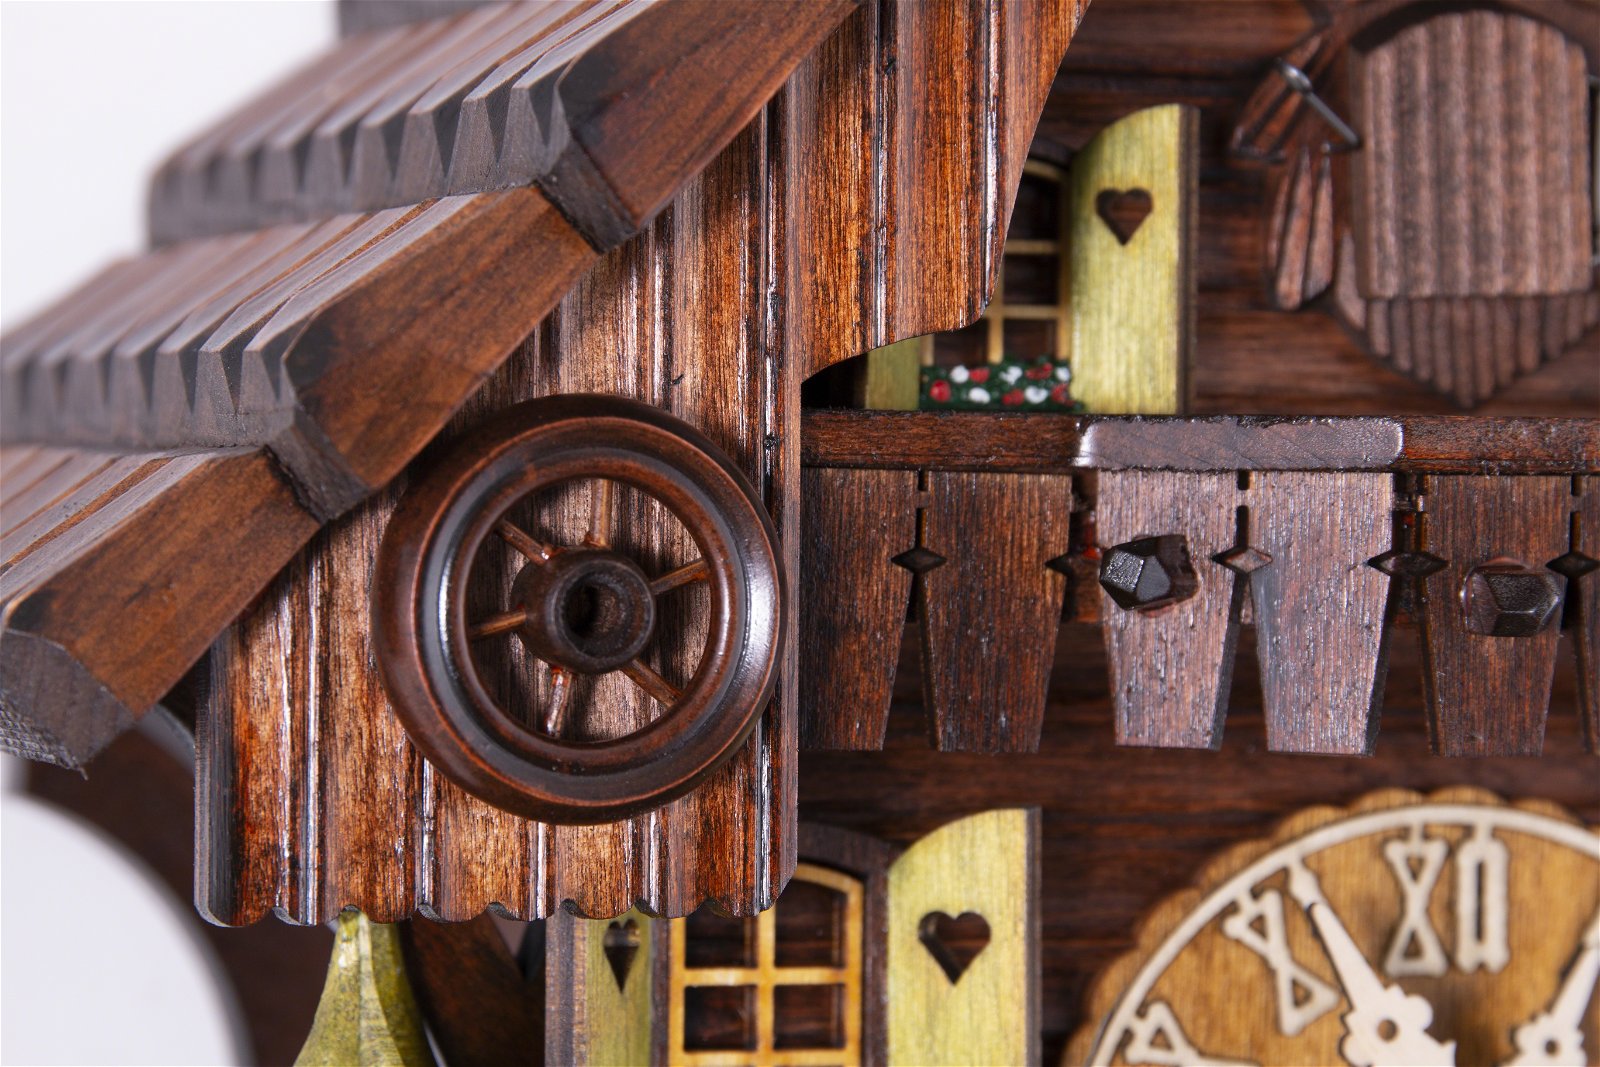 Cuckoo Clock 8-day-movement Chalet-Style 32cm by Hekas